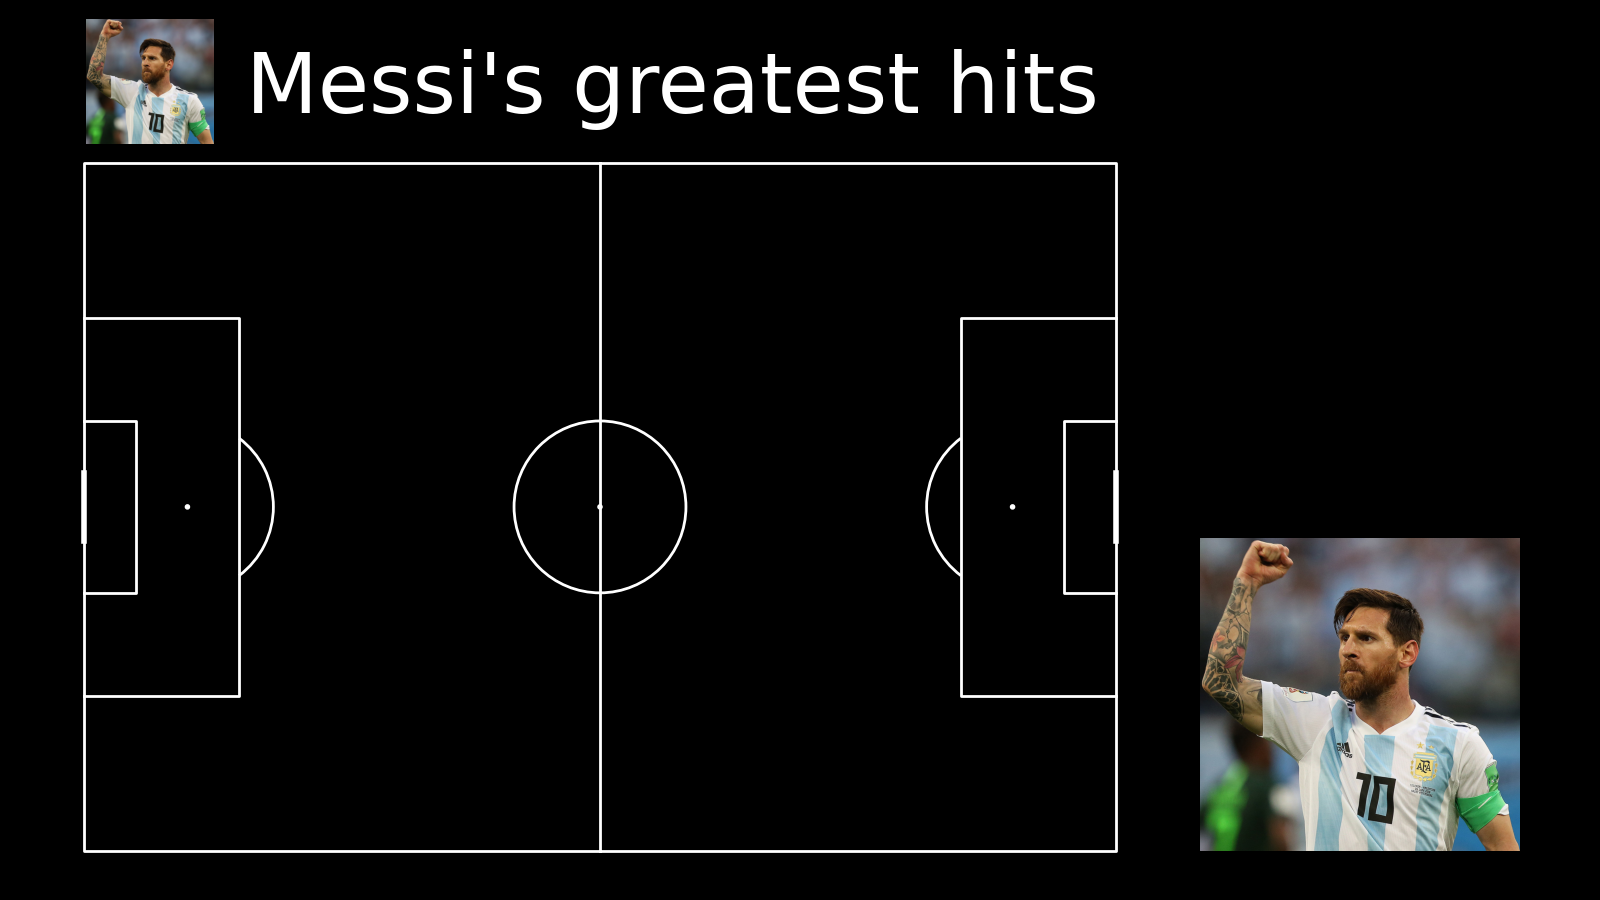 Messi's greatest hits